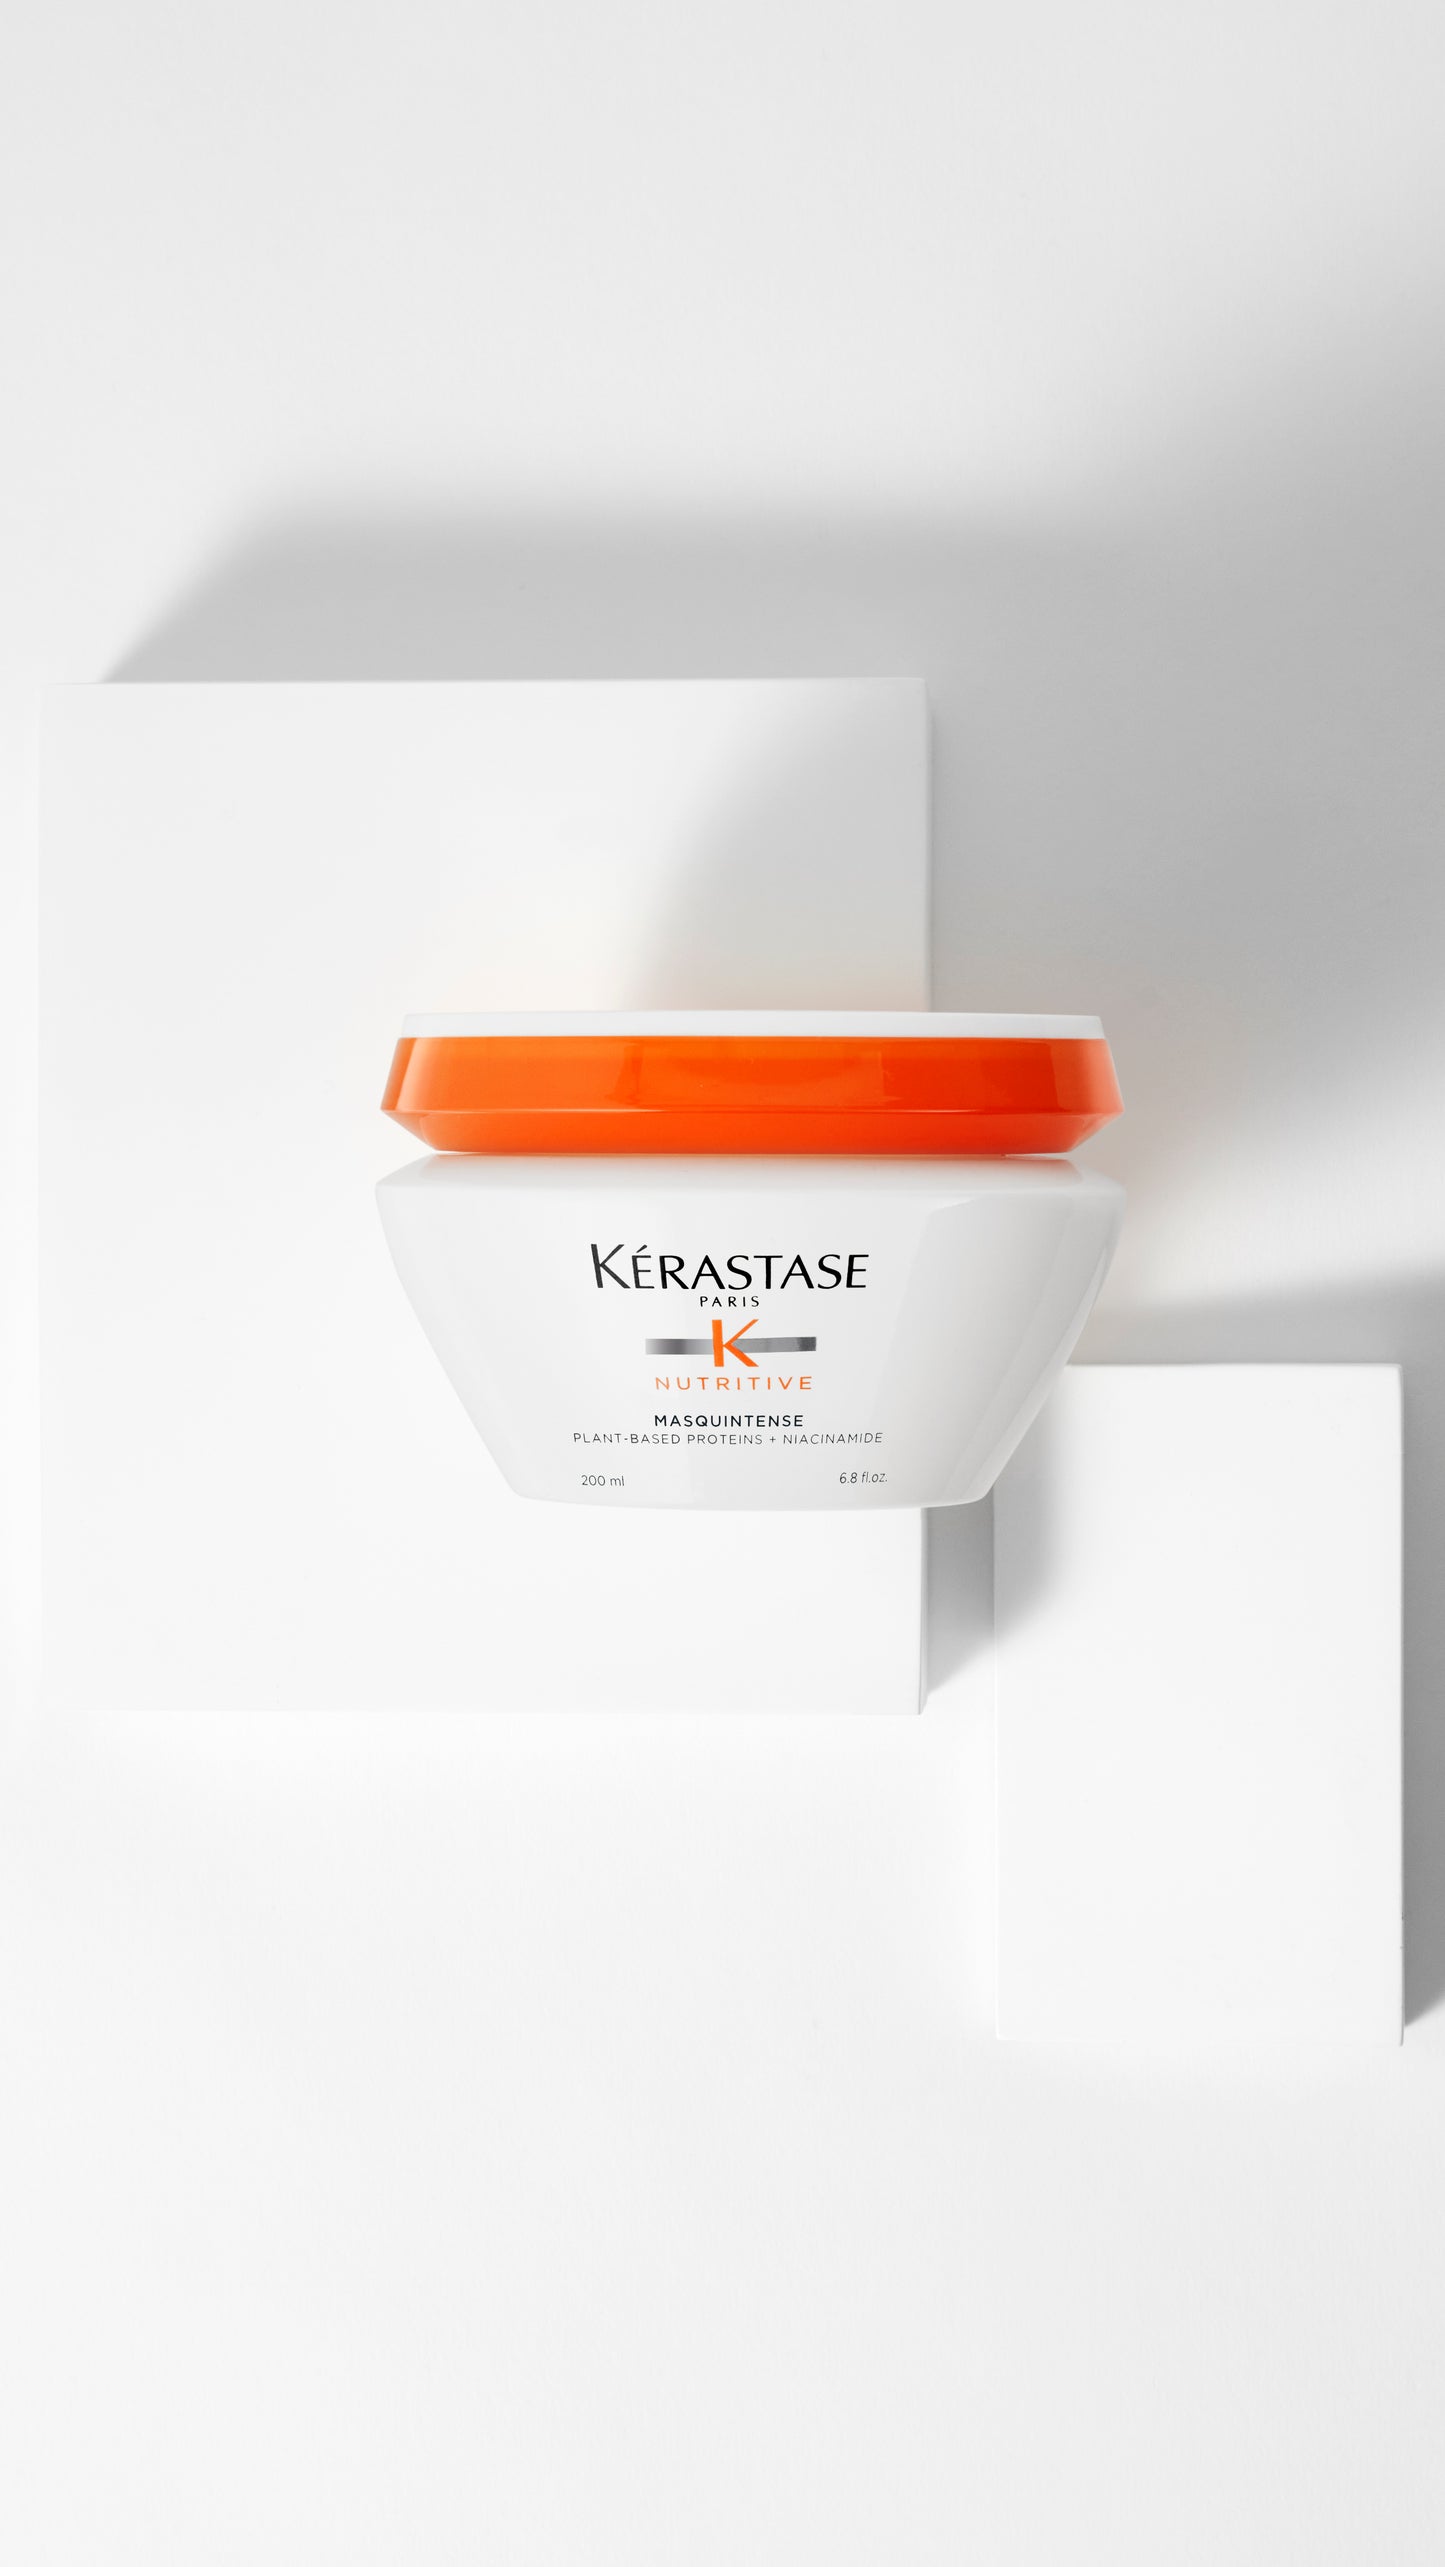 Nutritive Masquintense for Very Dry and Fine Hair 200ml